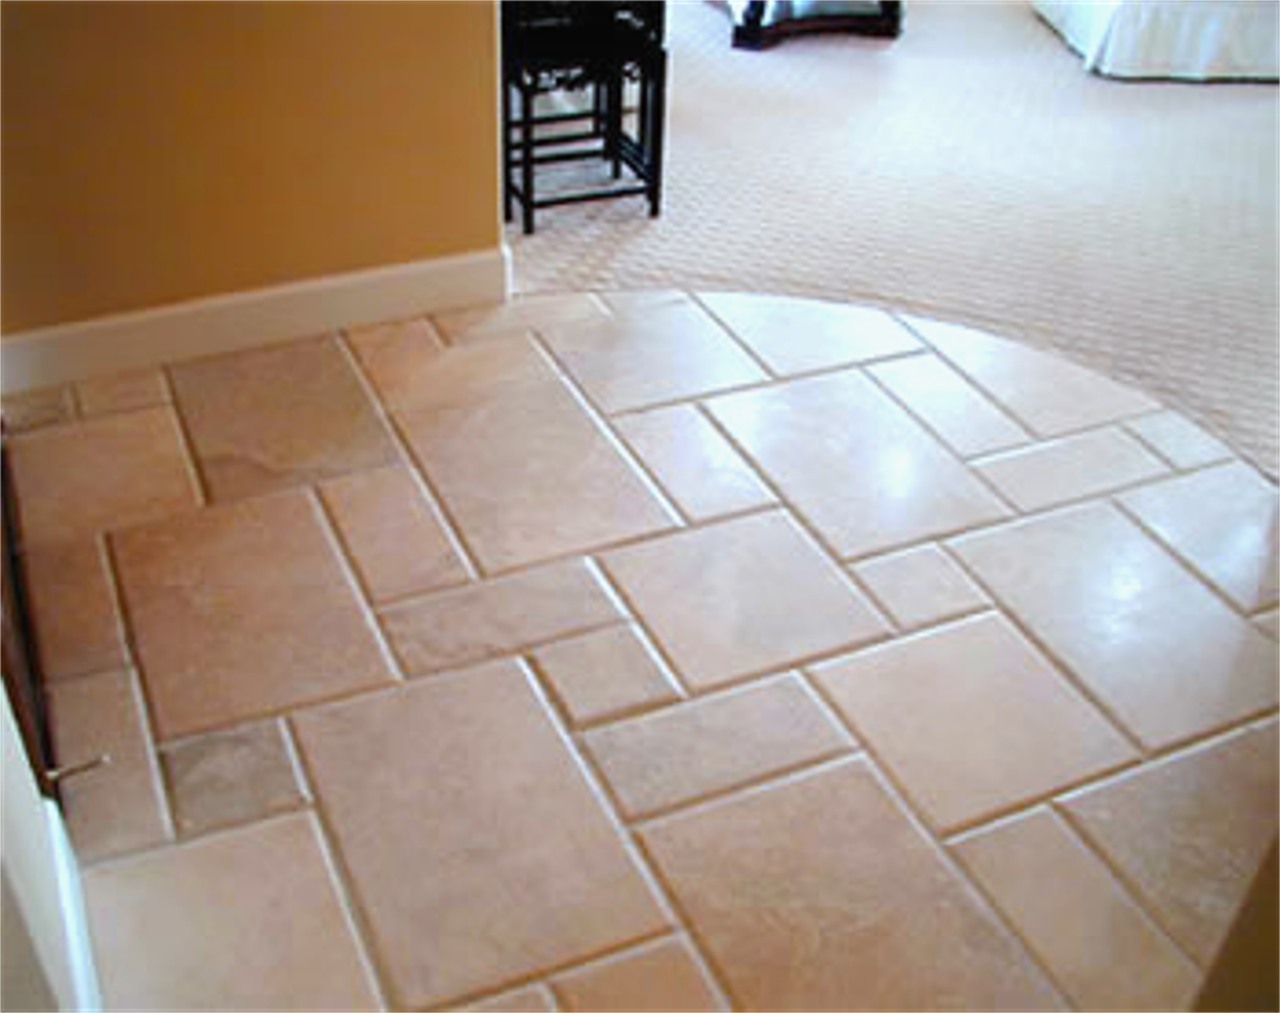 Benefits Of Tile Floors Home Construction Stanley Homes